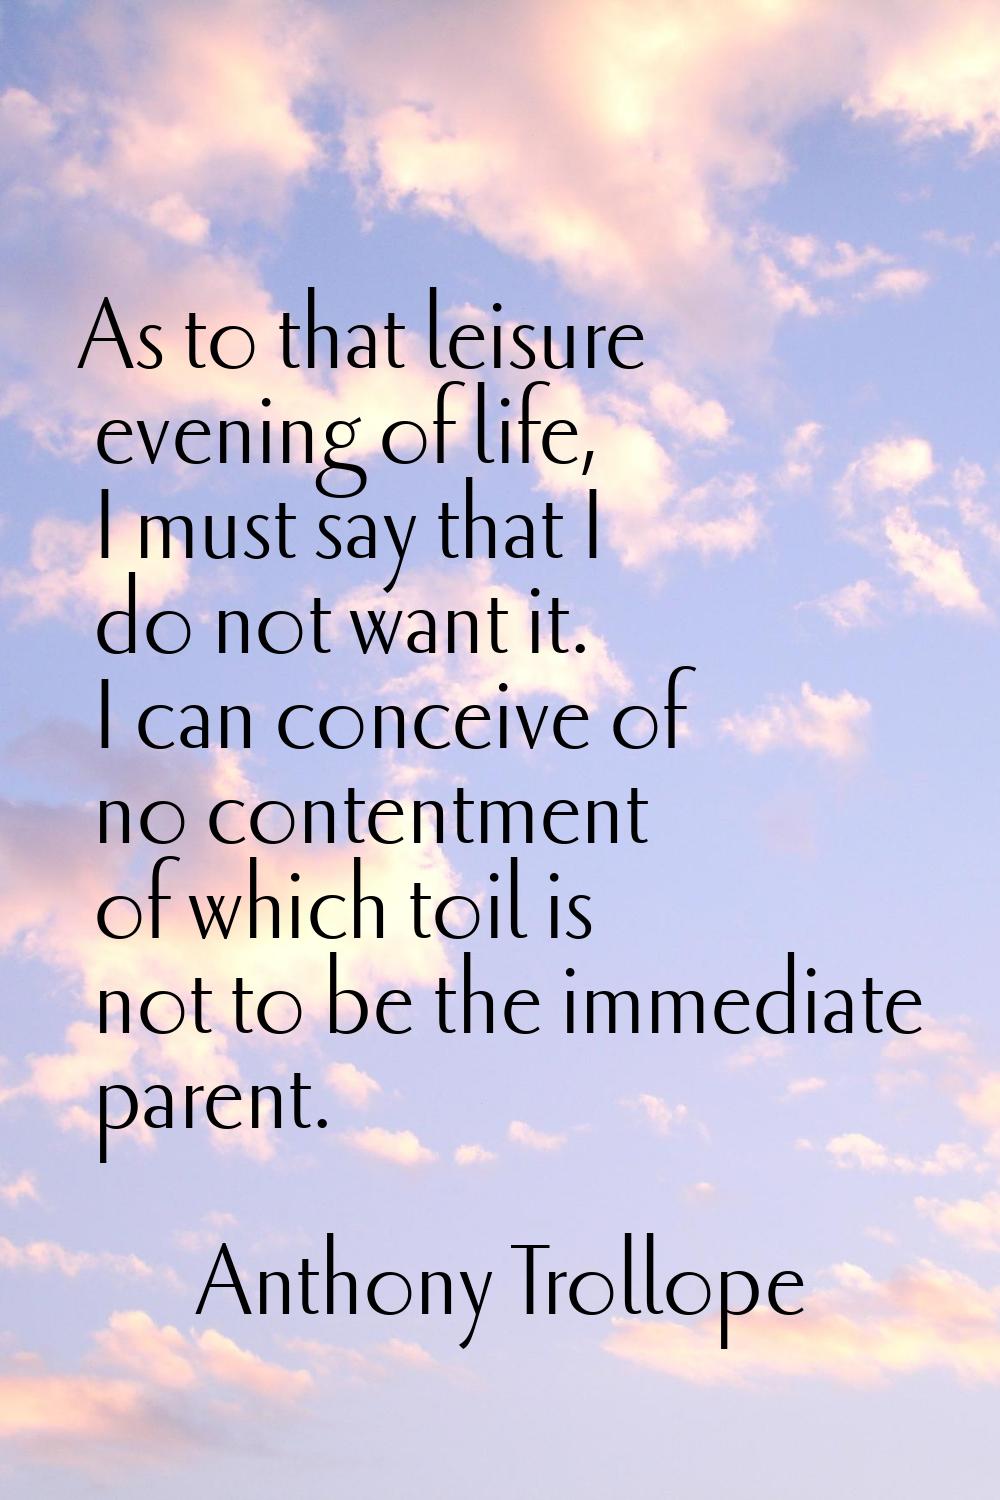 As to that leisure evening of life, I must say that I do not want it. I can conceive of no contentm